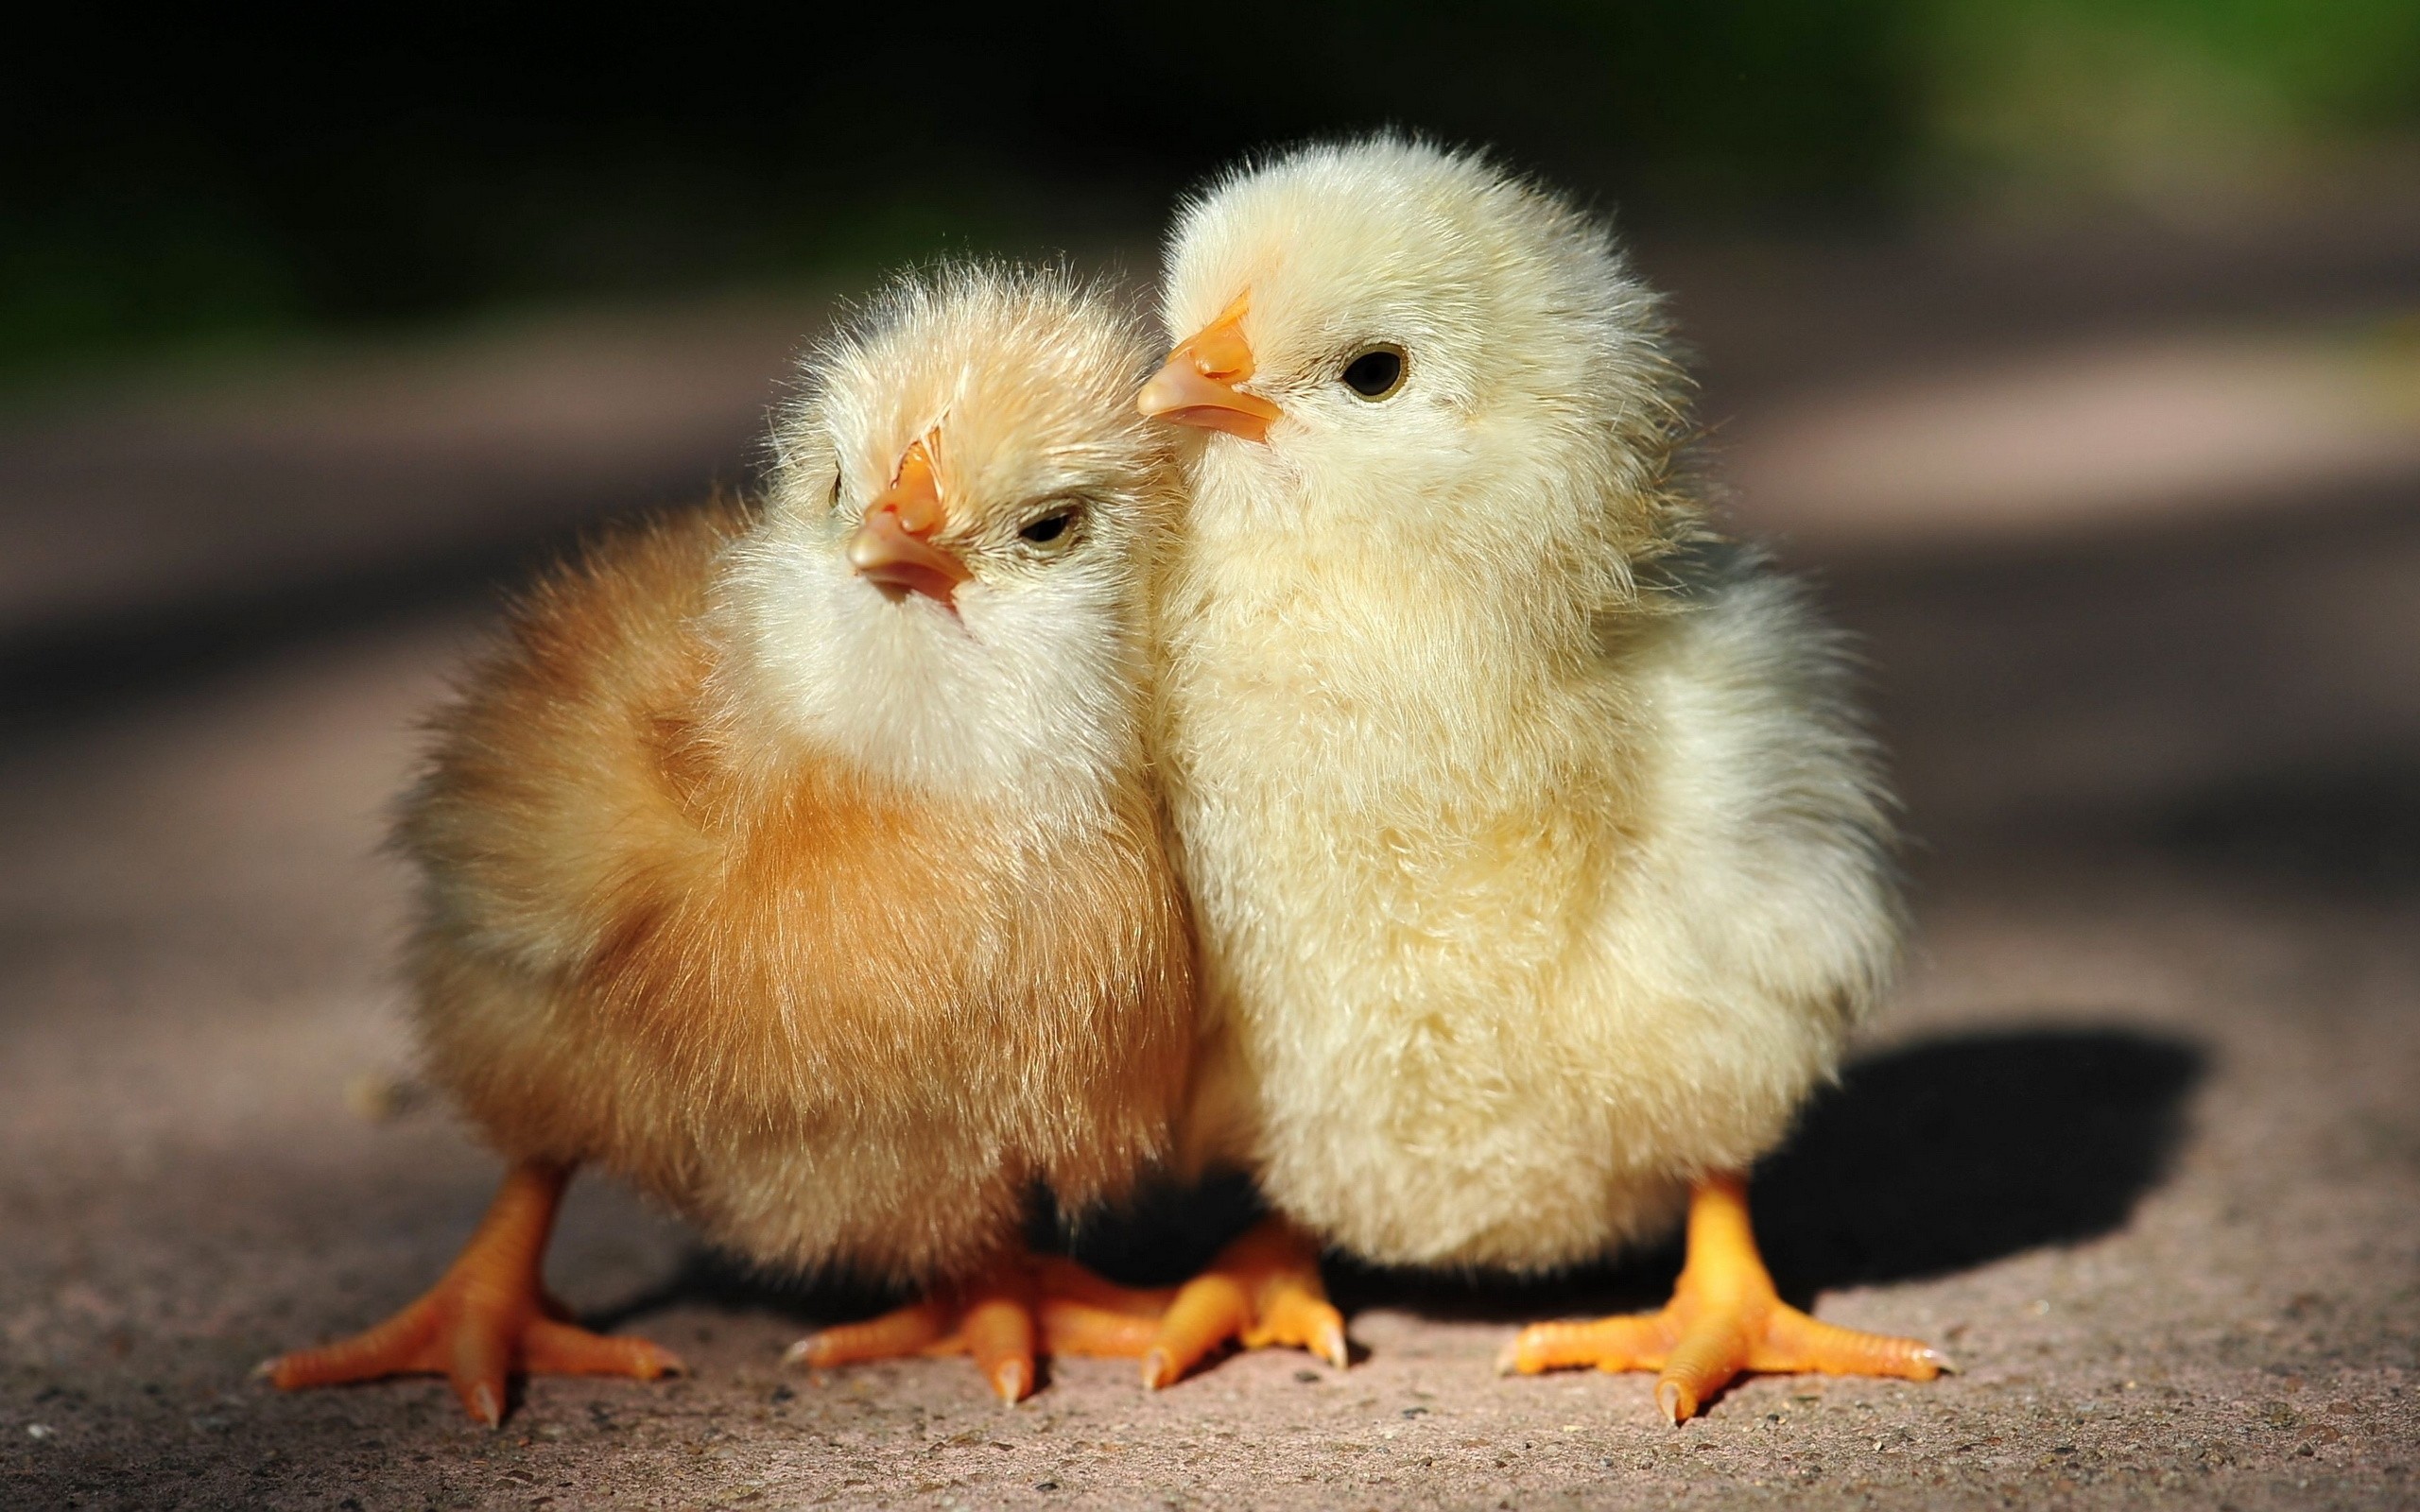 Cool Chicken Wallpapers